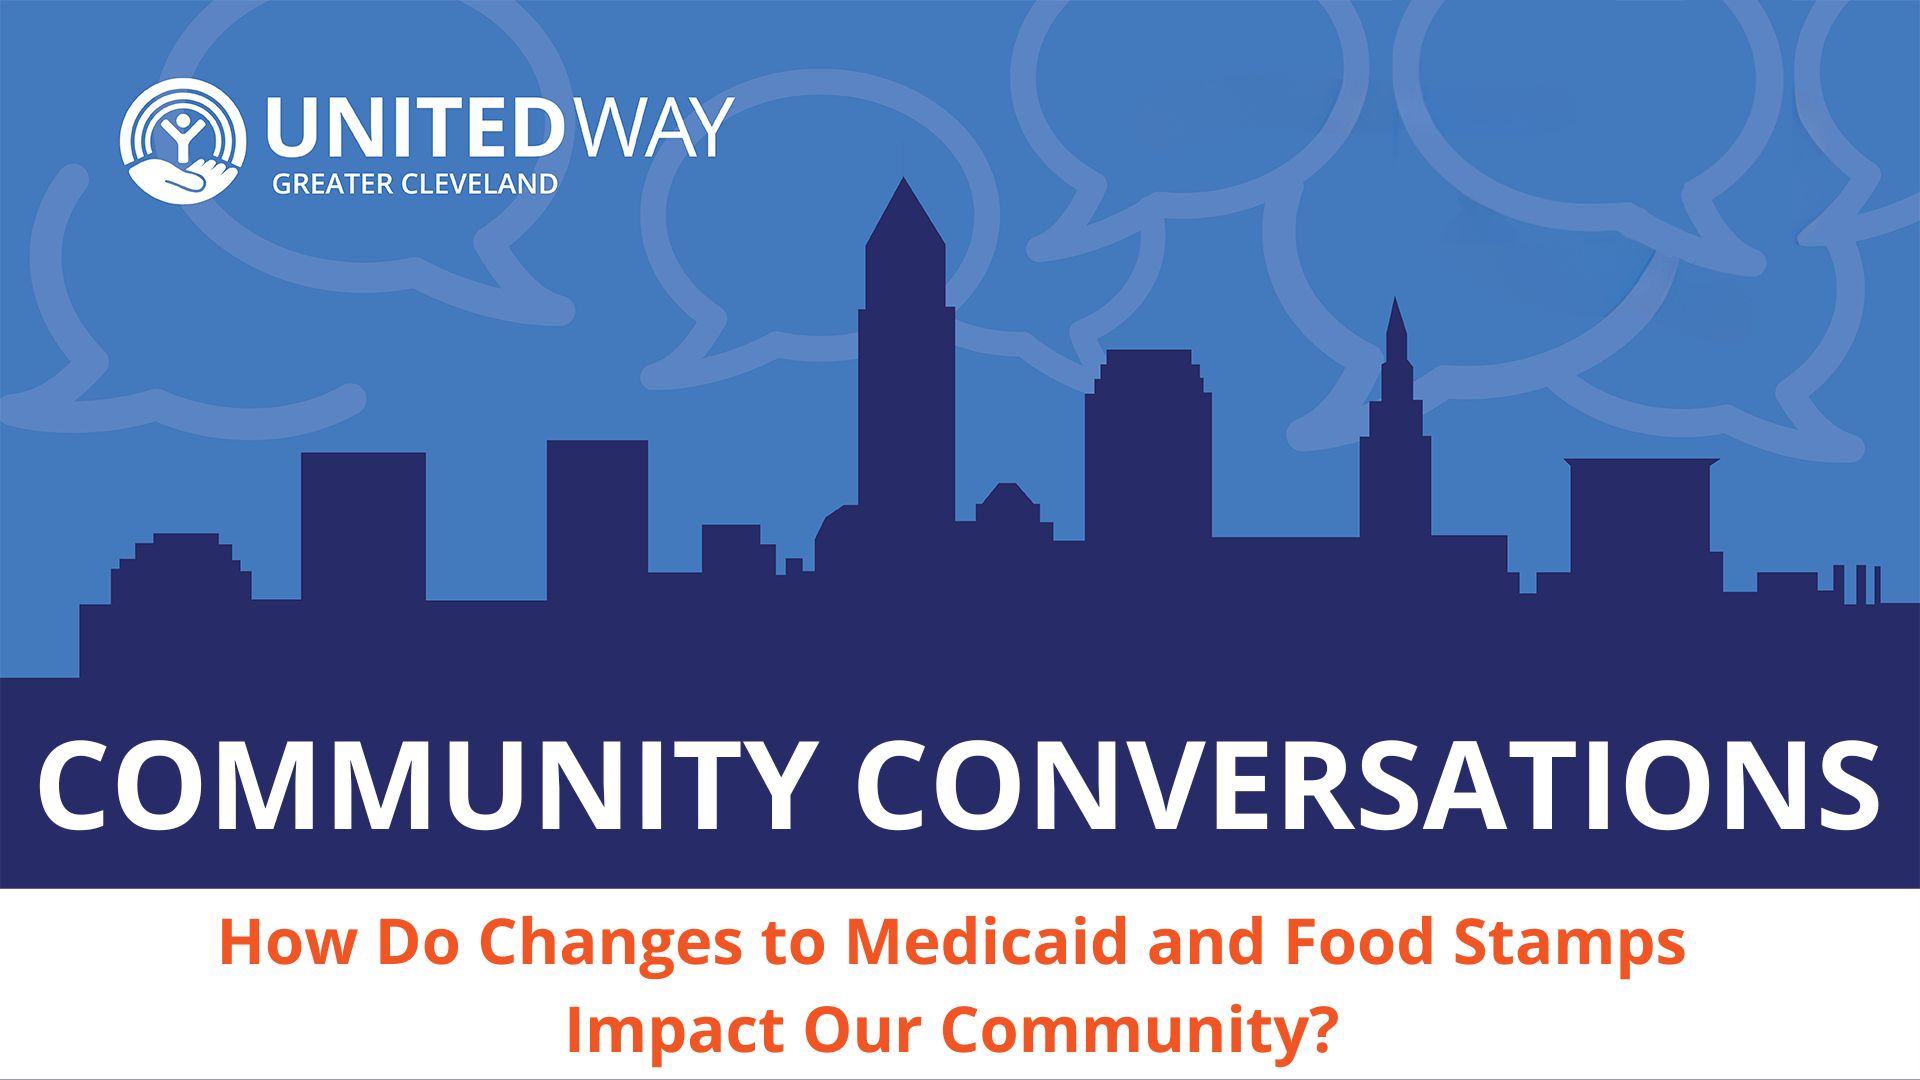 How do Changes to Medicaid and Food Stamps Impact Our Community?